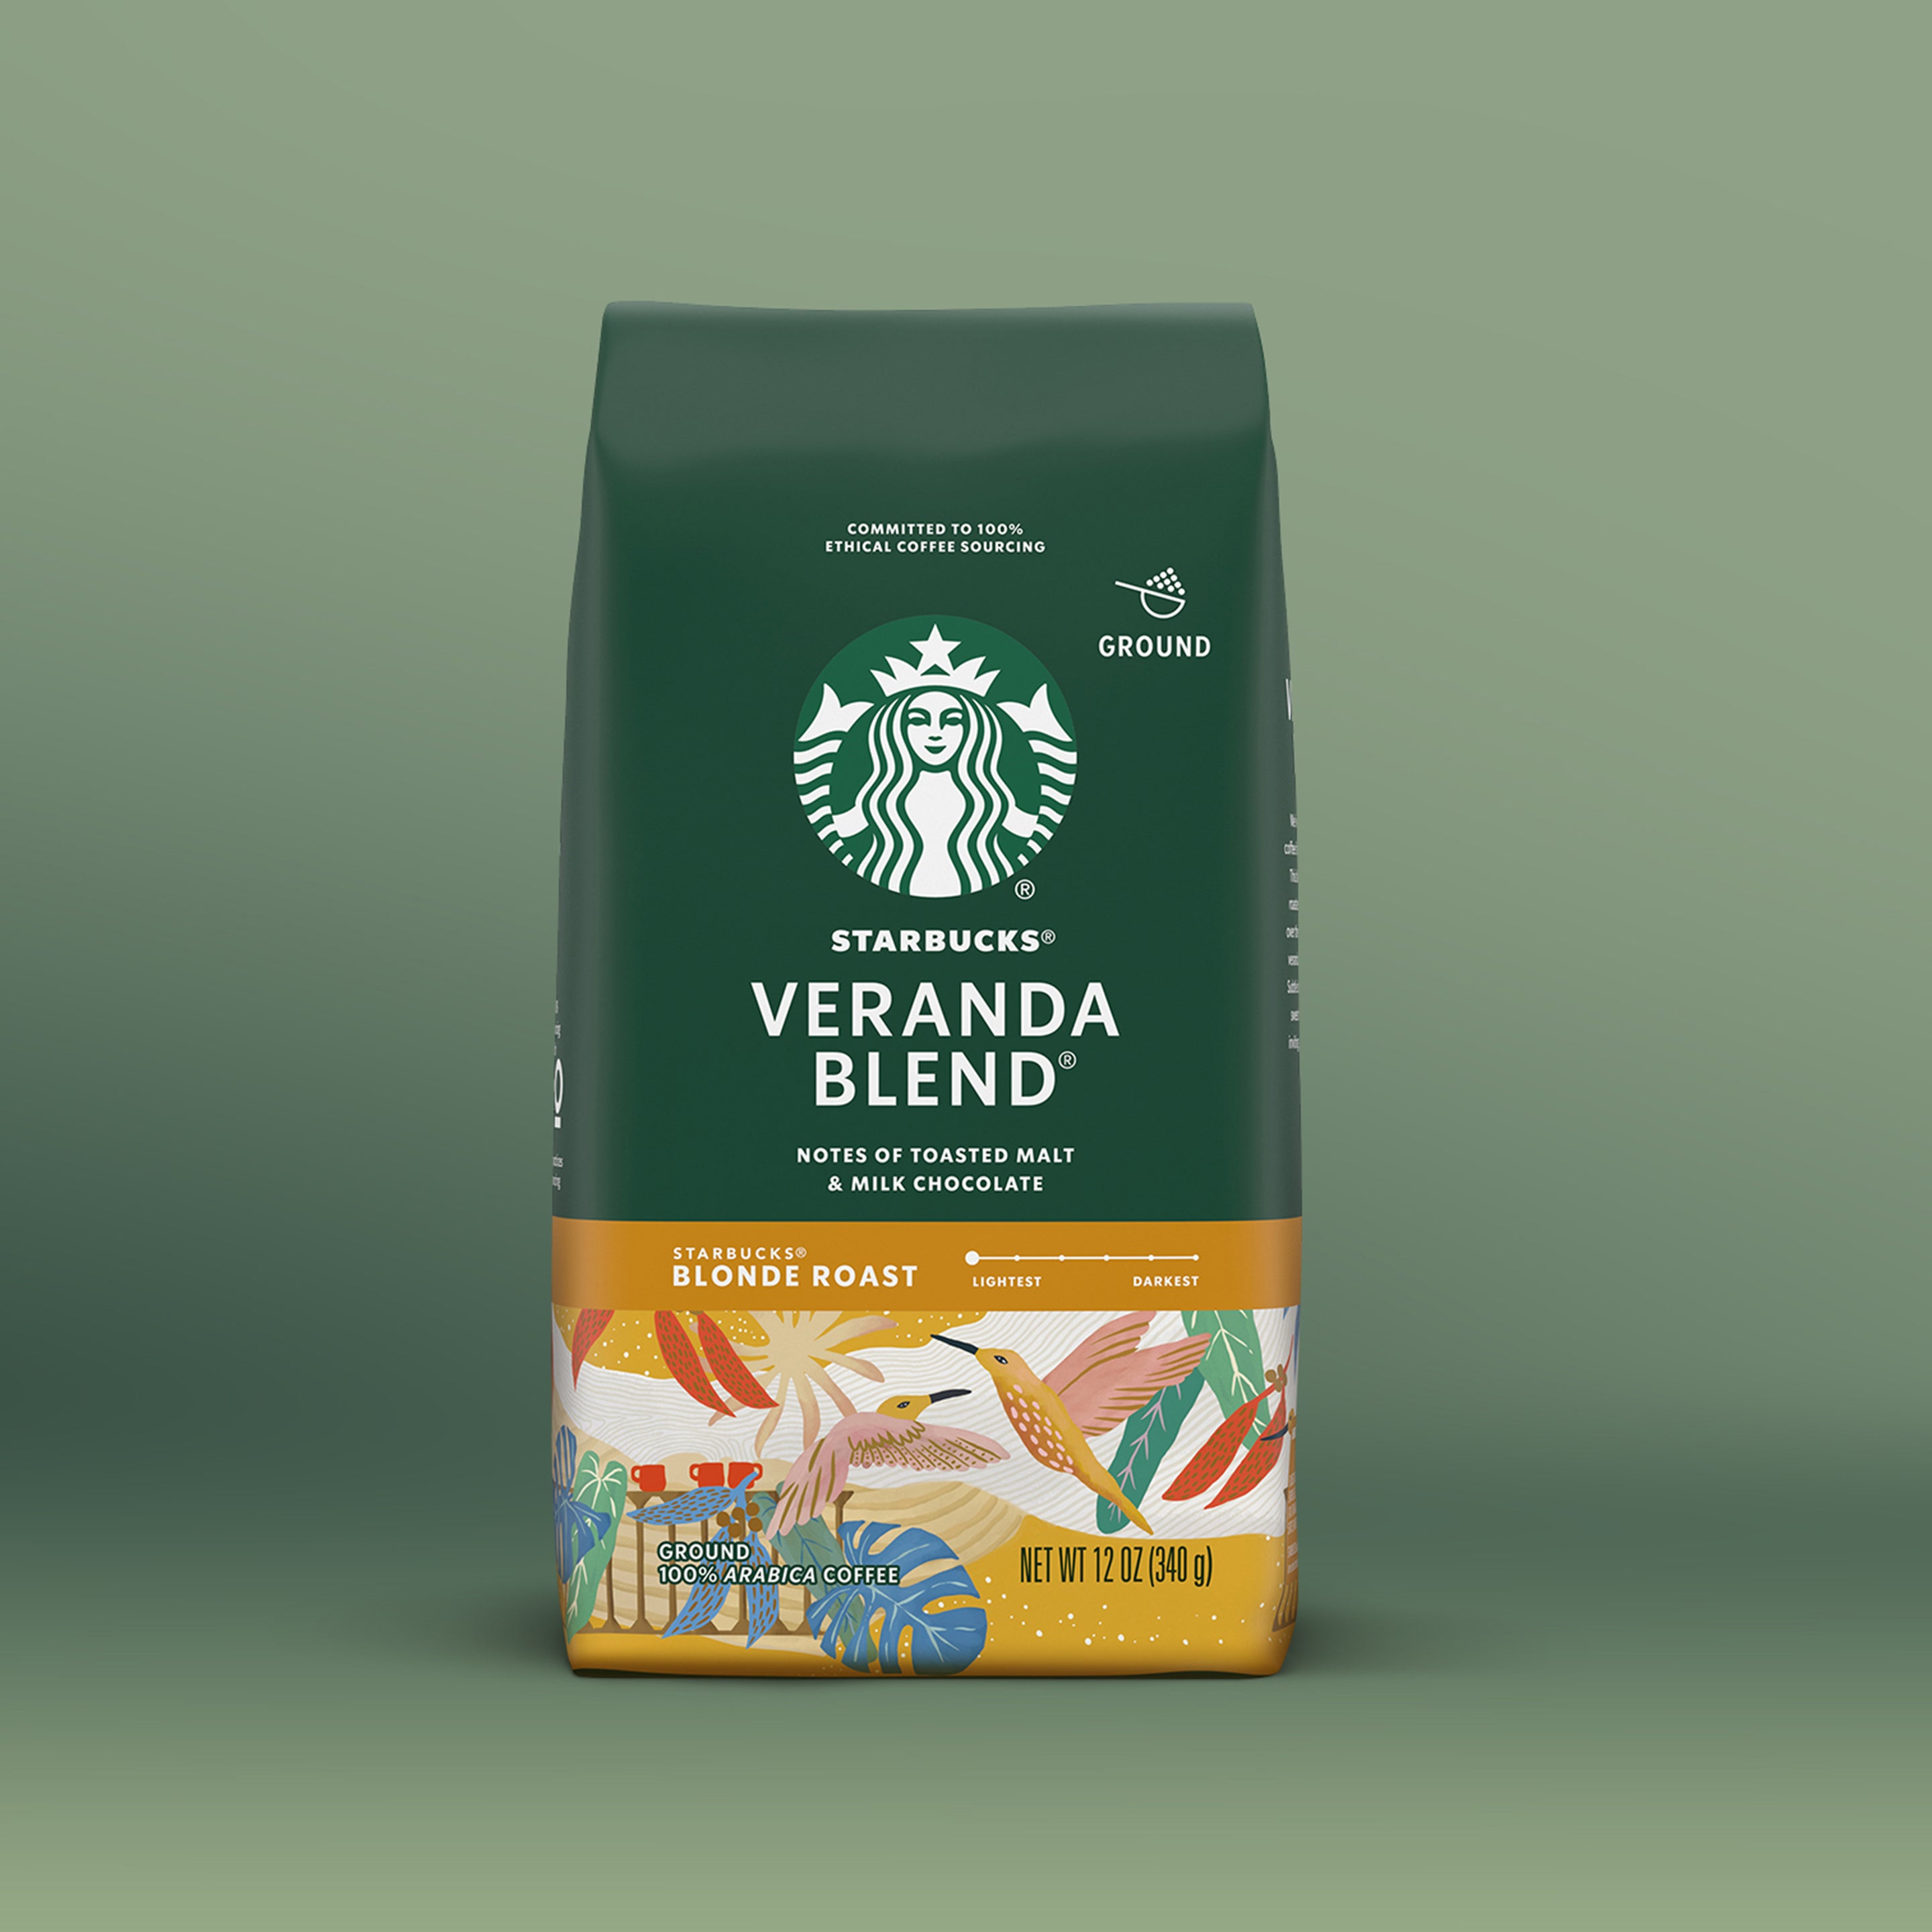 Our Guide to New Starbucks®️ Coffee at Home Packaging